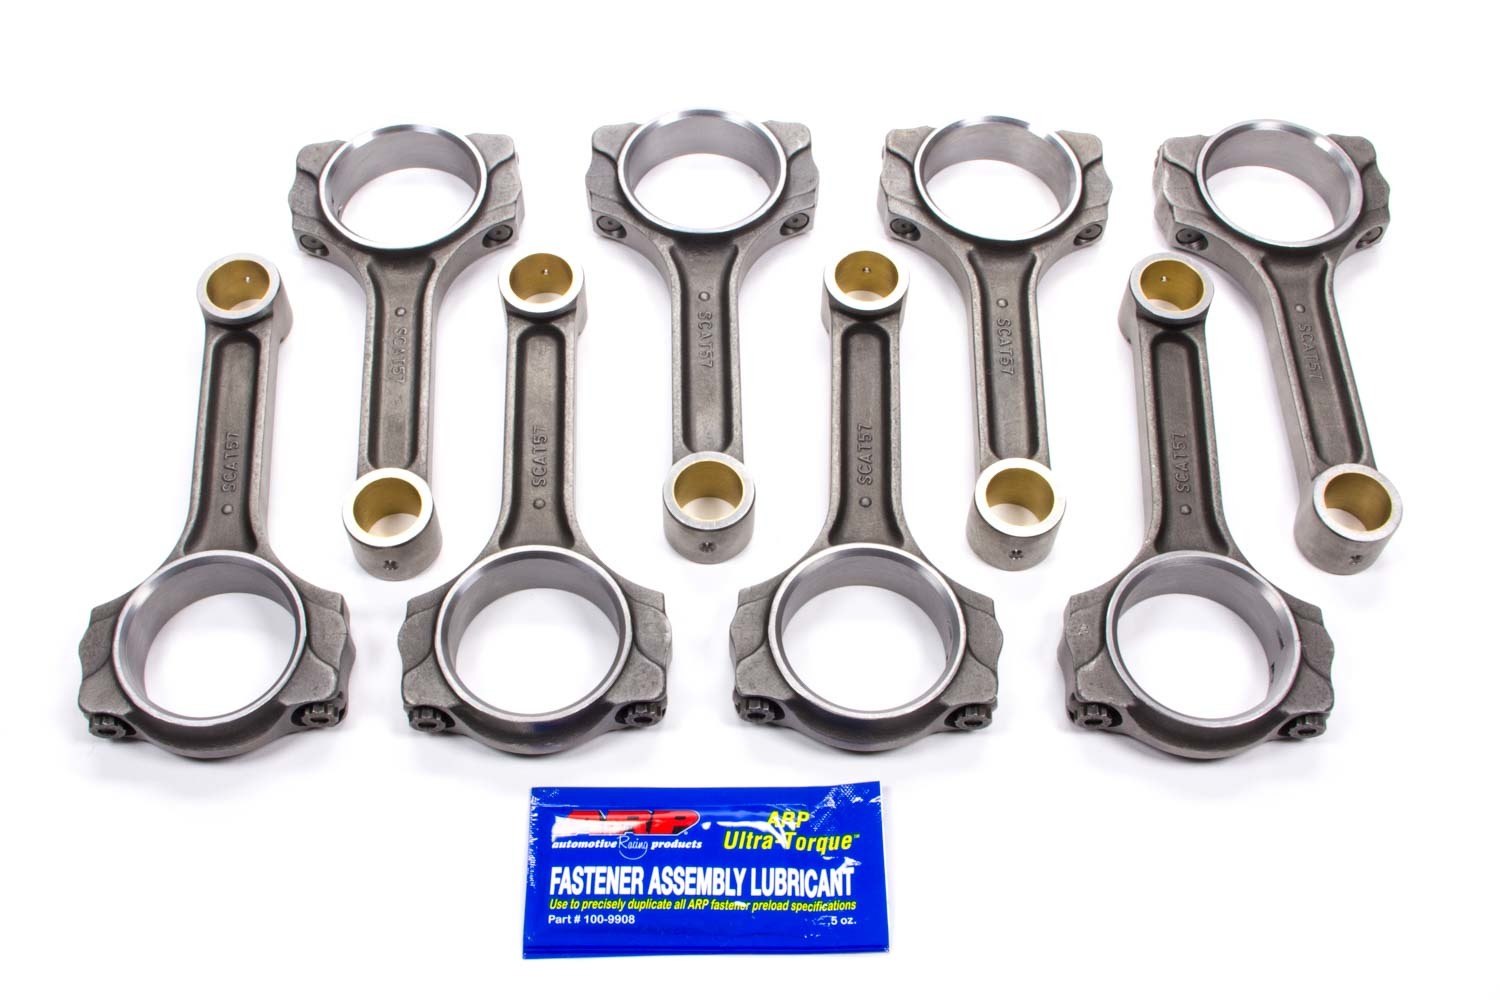 Scat 2-ICR6385-7/16 - Connecting Rod, Pro Comp, I Beam, 6.385 in Long, Bushed, 7/16 in Cap Screws, ARP8740, Forged Steel, Big Block Chevy, Set of 8